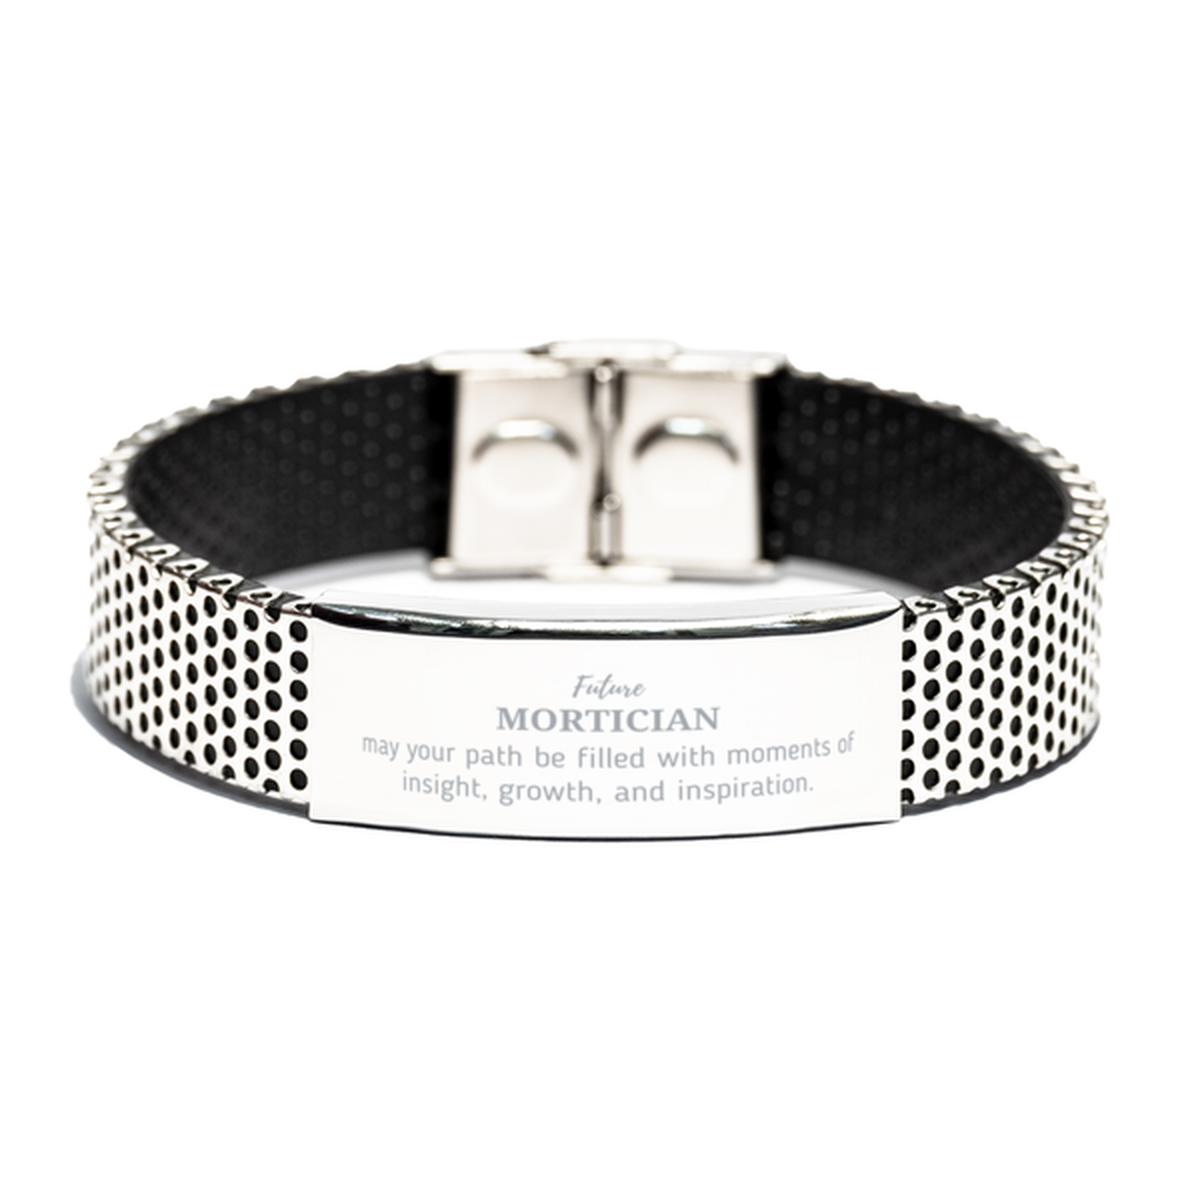 Future Mortician Gifts, May your path be filled with moments of insight, Graduation Gifts for New Mortician, Christmas Unique Stainless Steel Bracelet For Men, Women, Friends